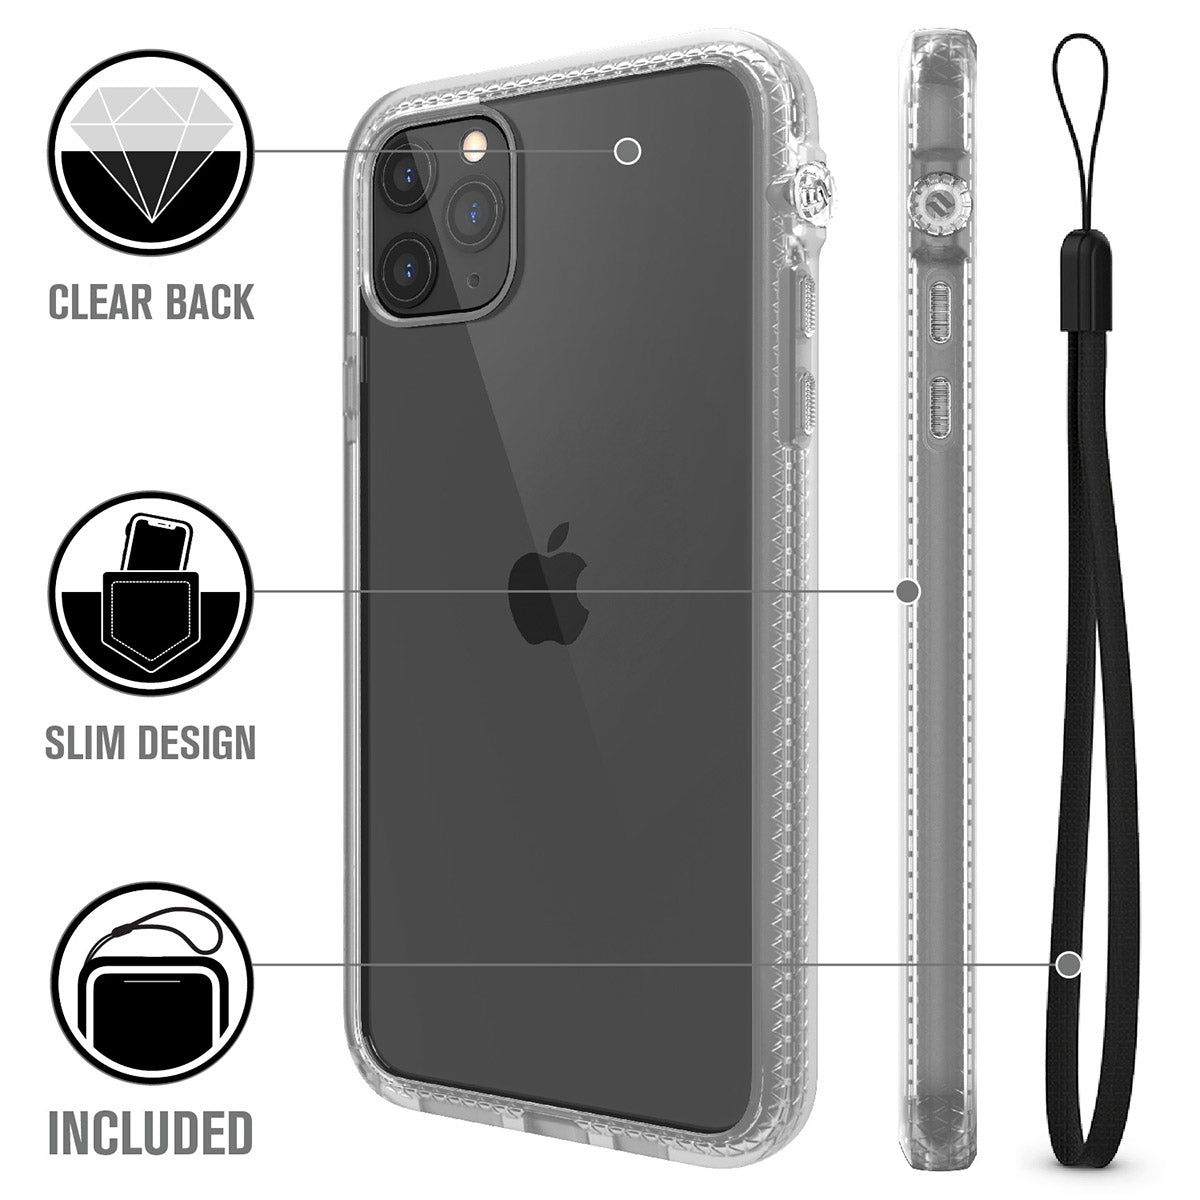 catalyst iPhone 11 series impact protection case clear showing the back view and buttons of the case for iPhone 11 pro max and a lanyard text reads clear back slim design included